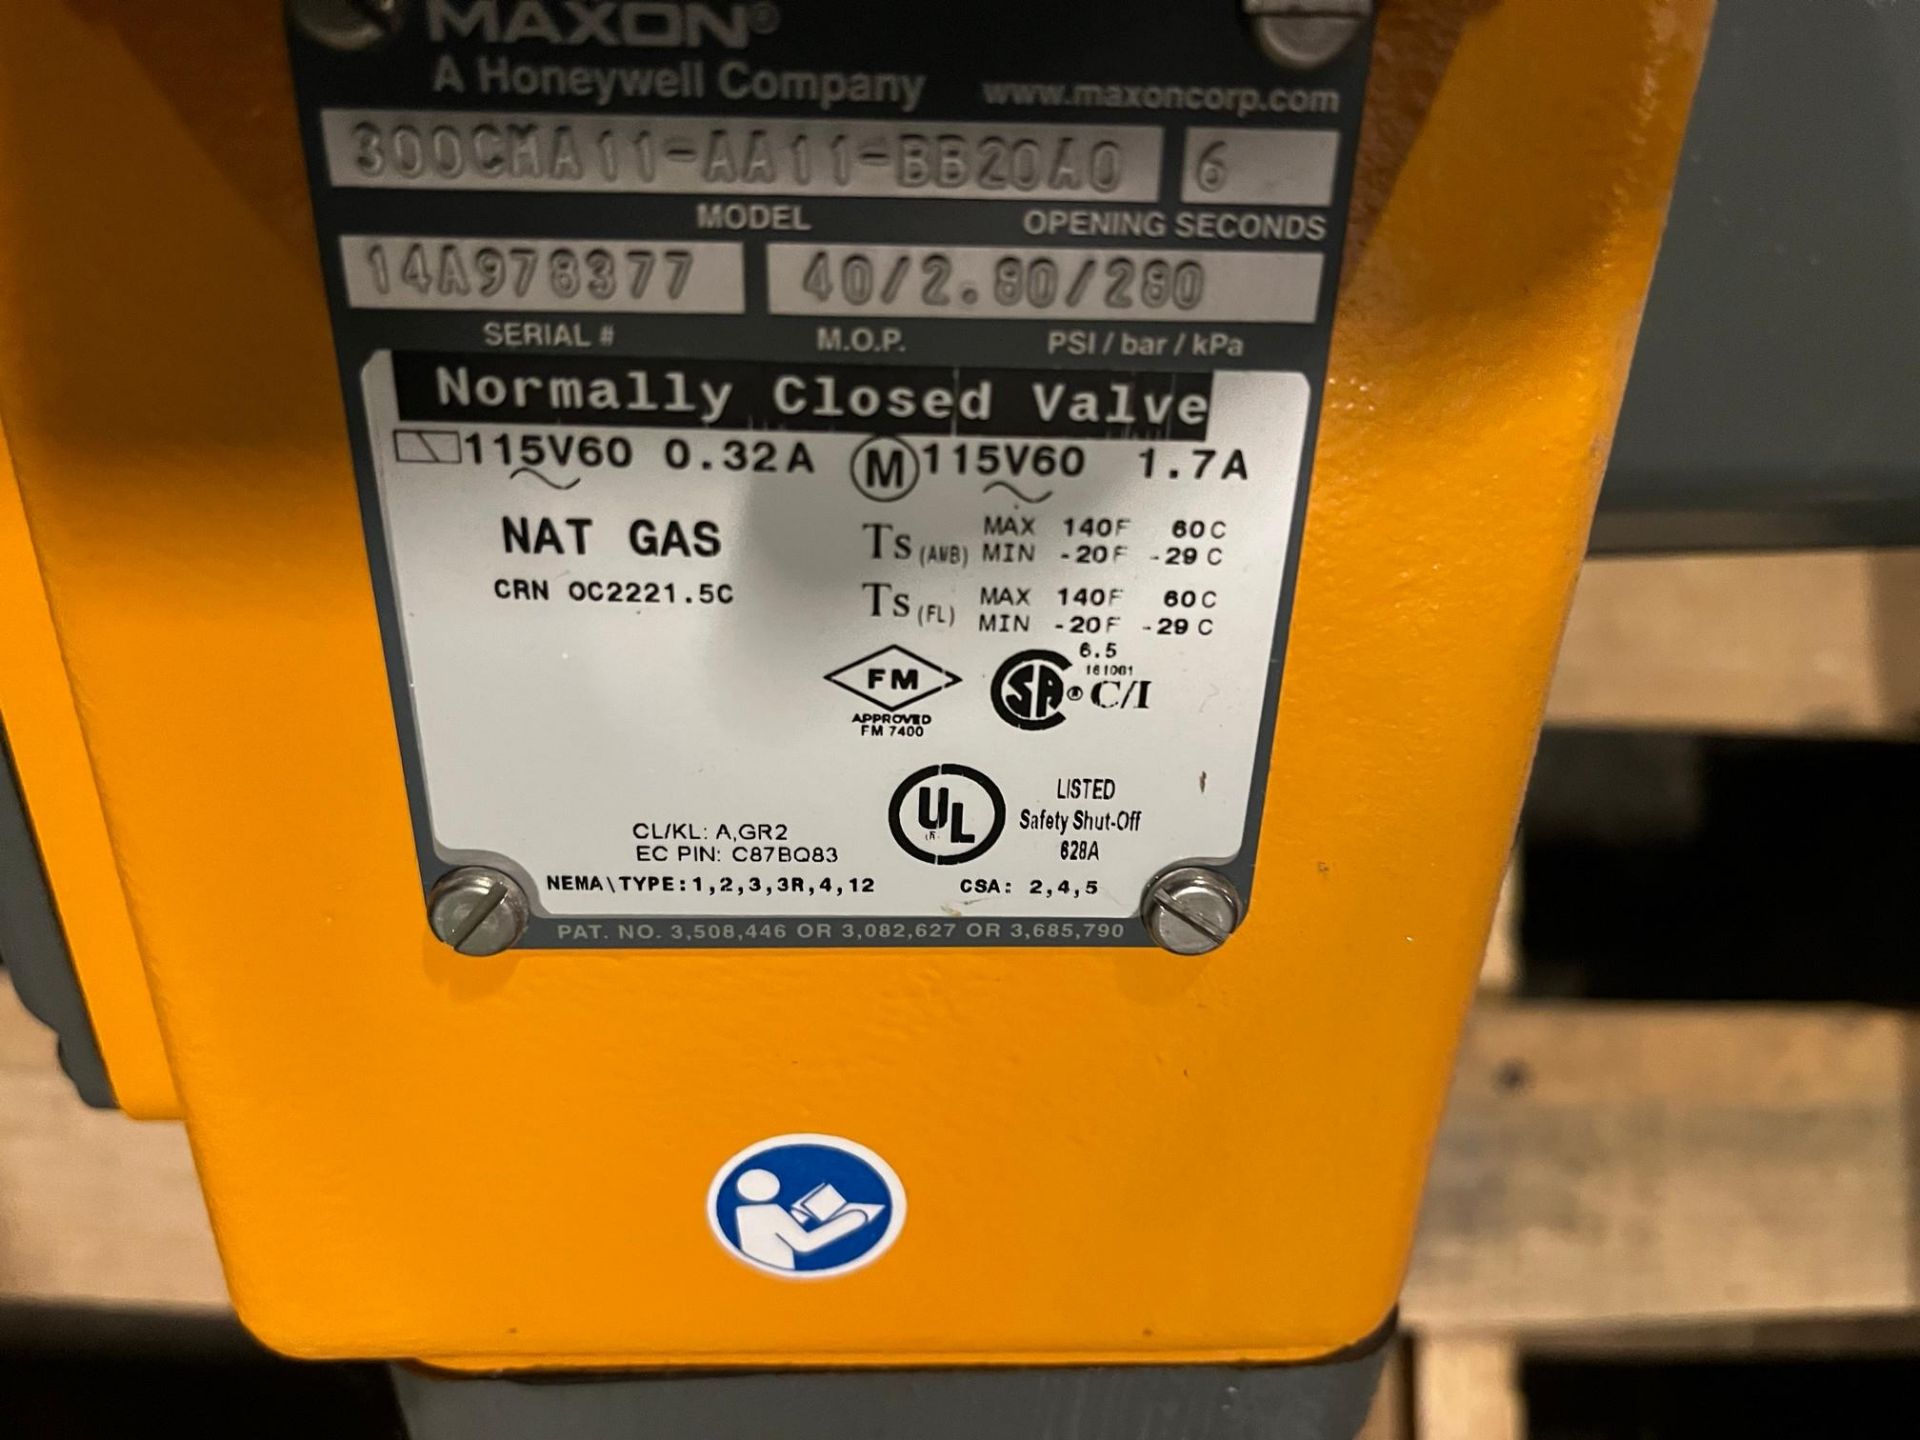 MAXION NATURAL GAS VALVE MODEL 300 CMA11-AA11-BB20A0 (PM ROOM EAST SIDE) - Image 3 of 3